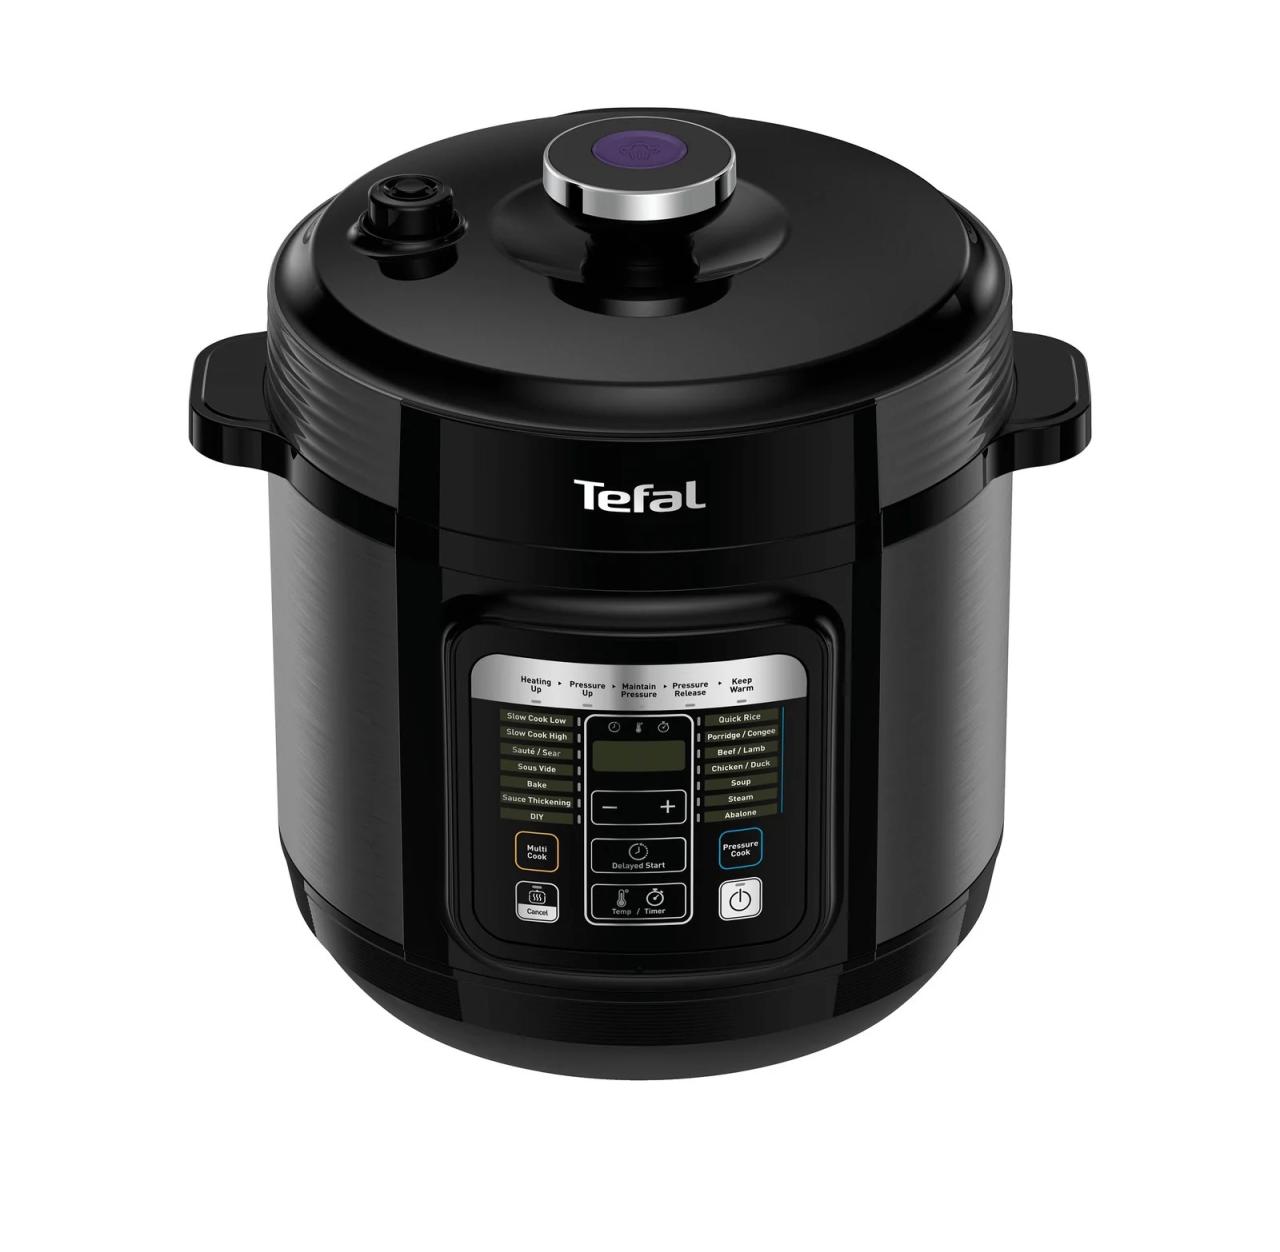 Tefal Home Chef Smart Multicooker: The Kitchen Companion for Modern Chefs